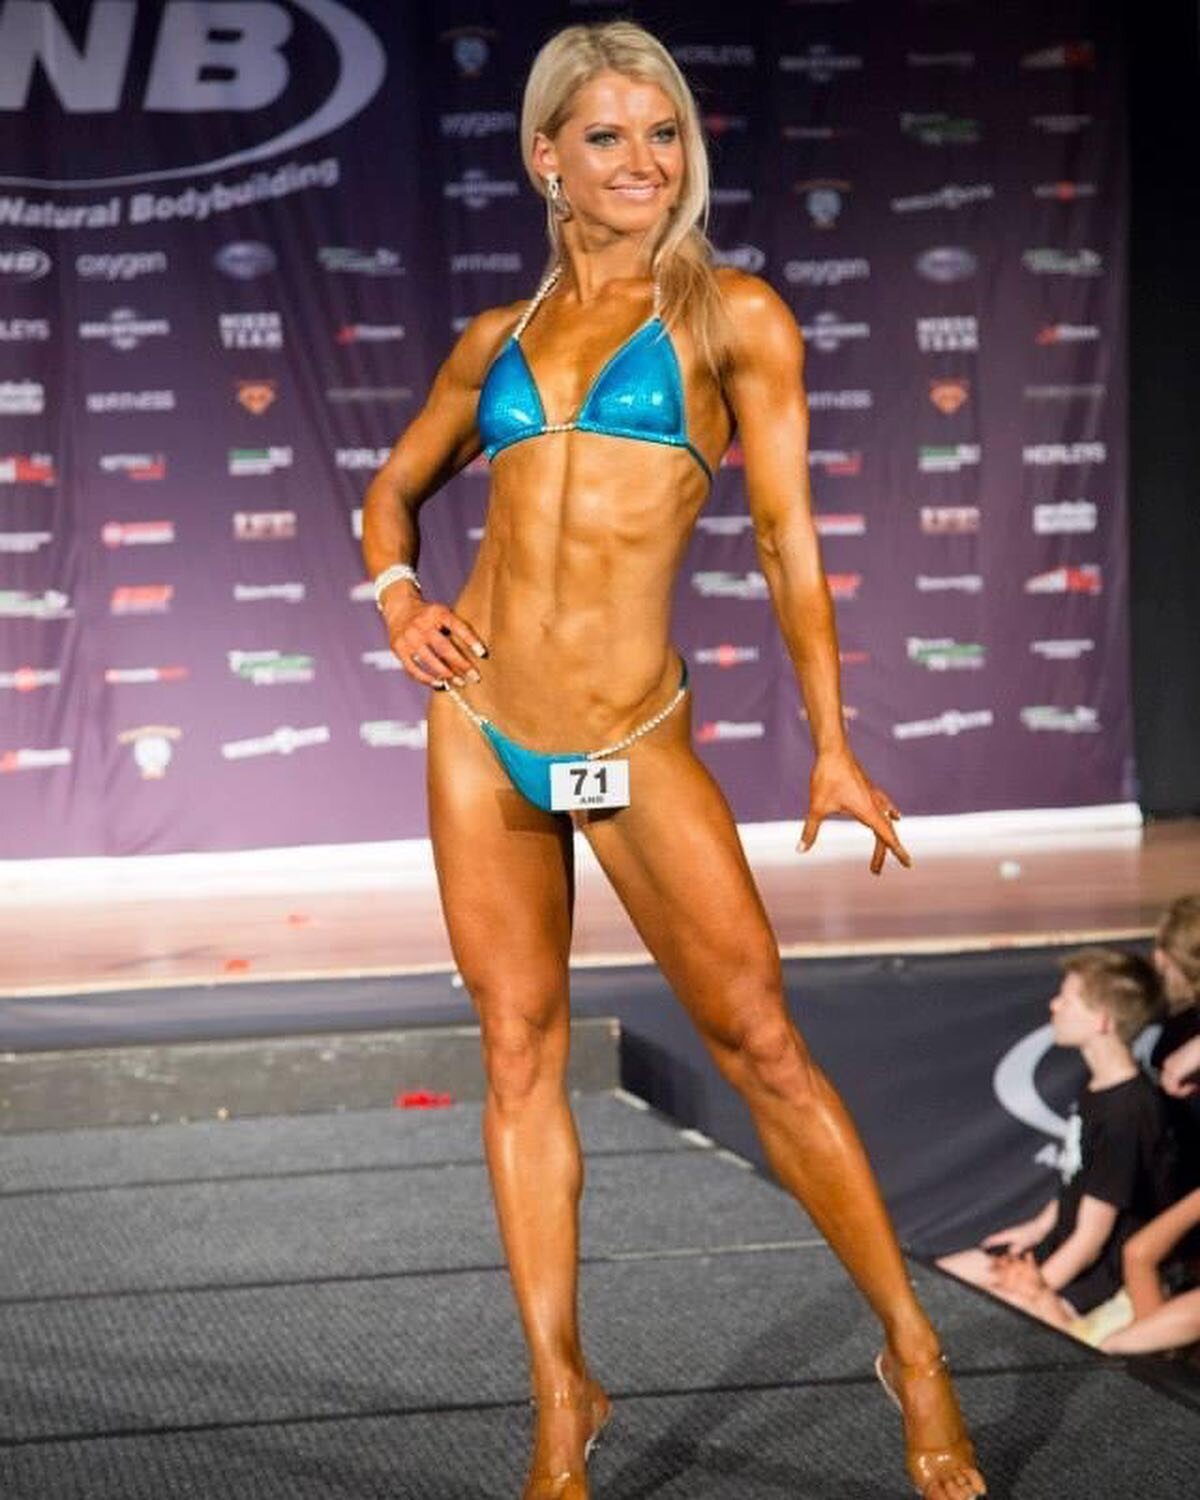 6 years ago this was me at the national fitness modelling championship that I won in Sydney. This probably looks a little out of context for this page, so let me explain&hellip;
A lot of people look at these photos and think wow her bodies amazing or